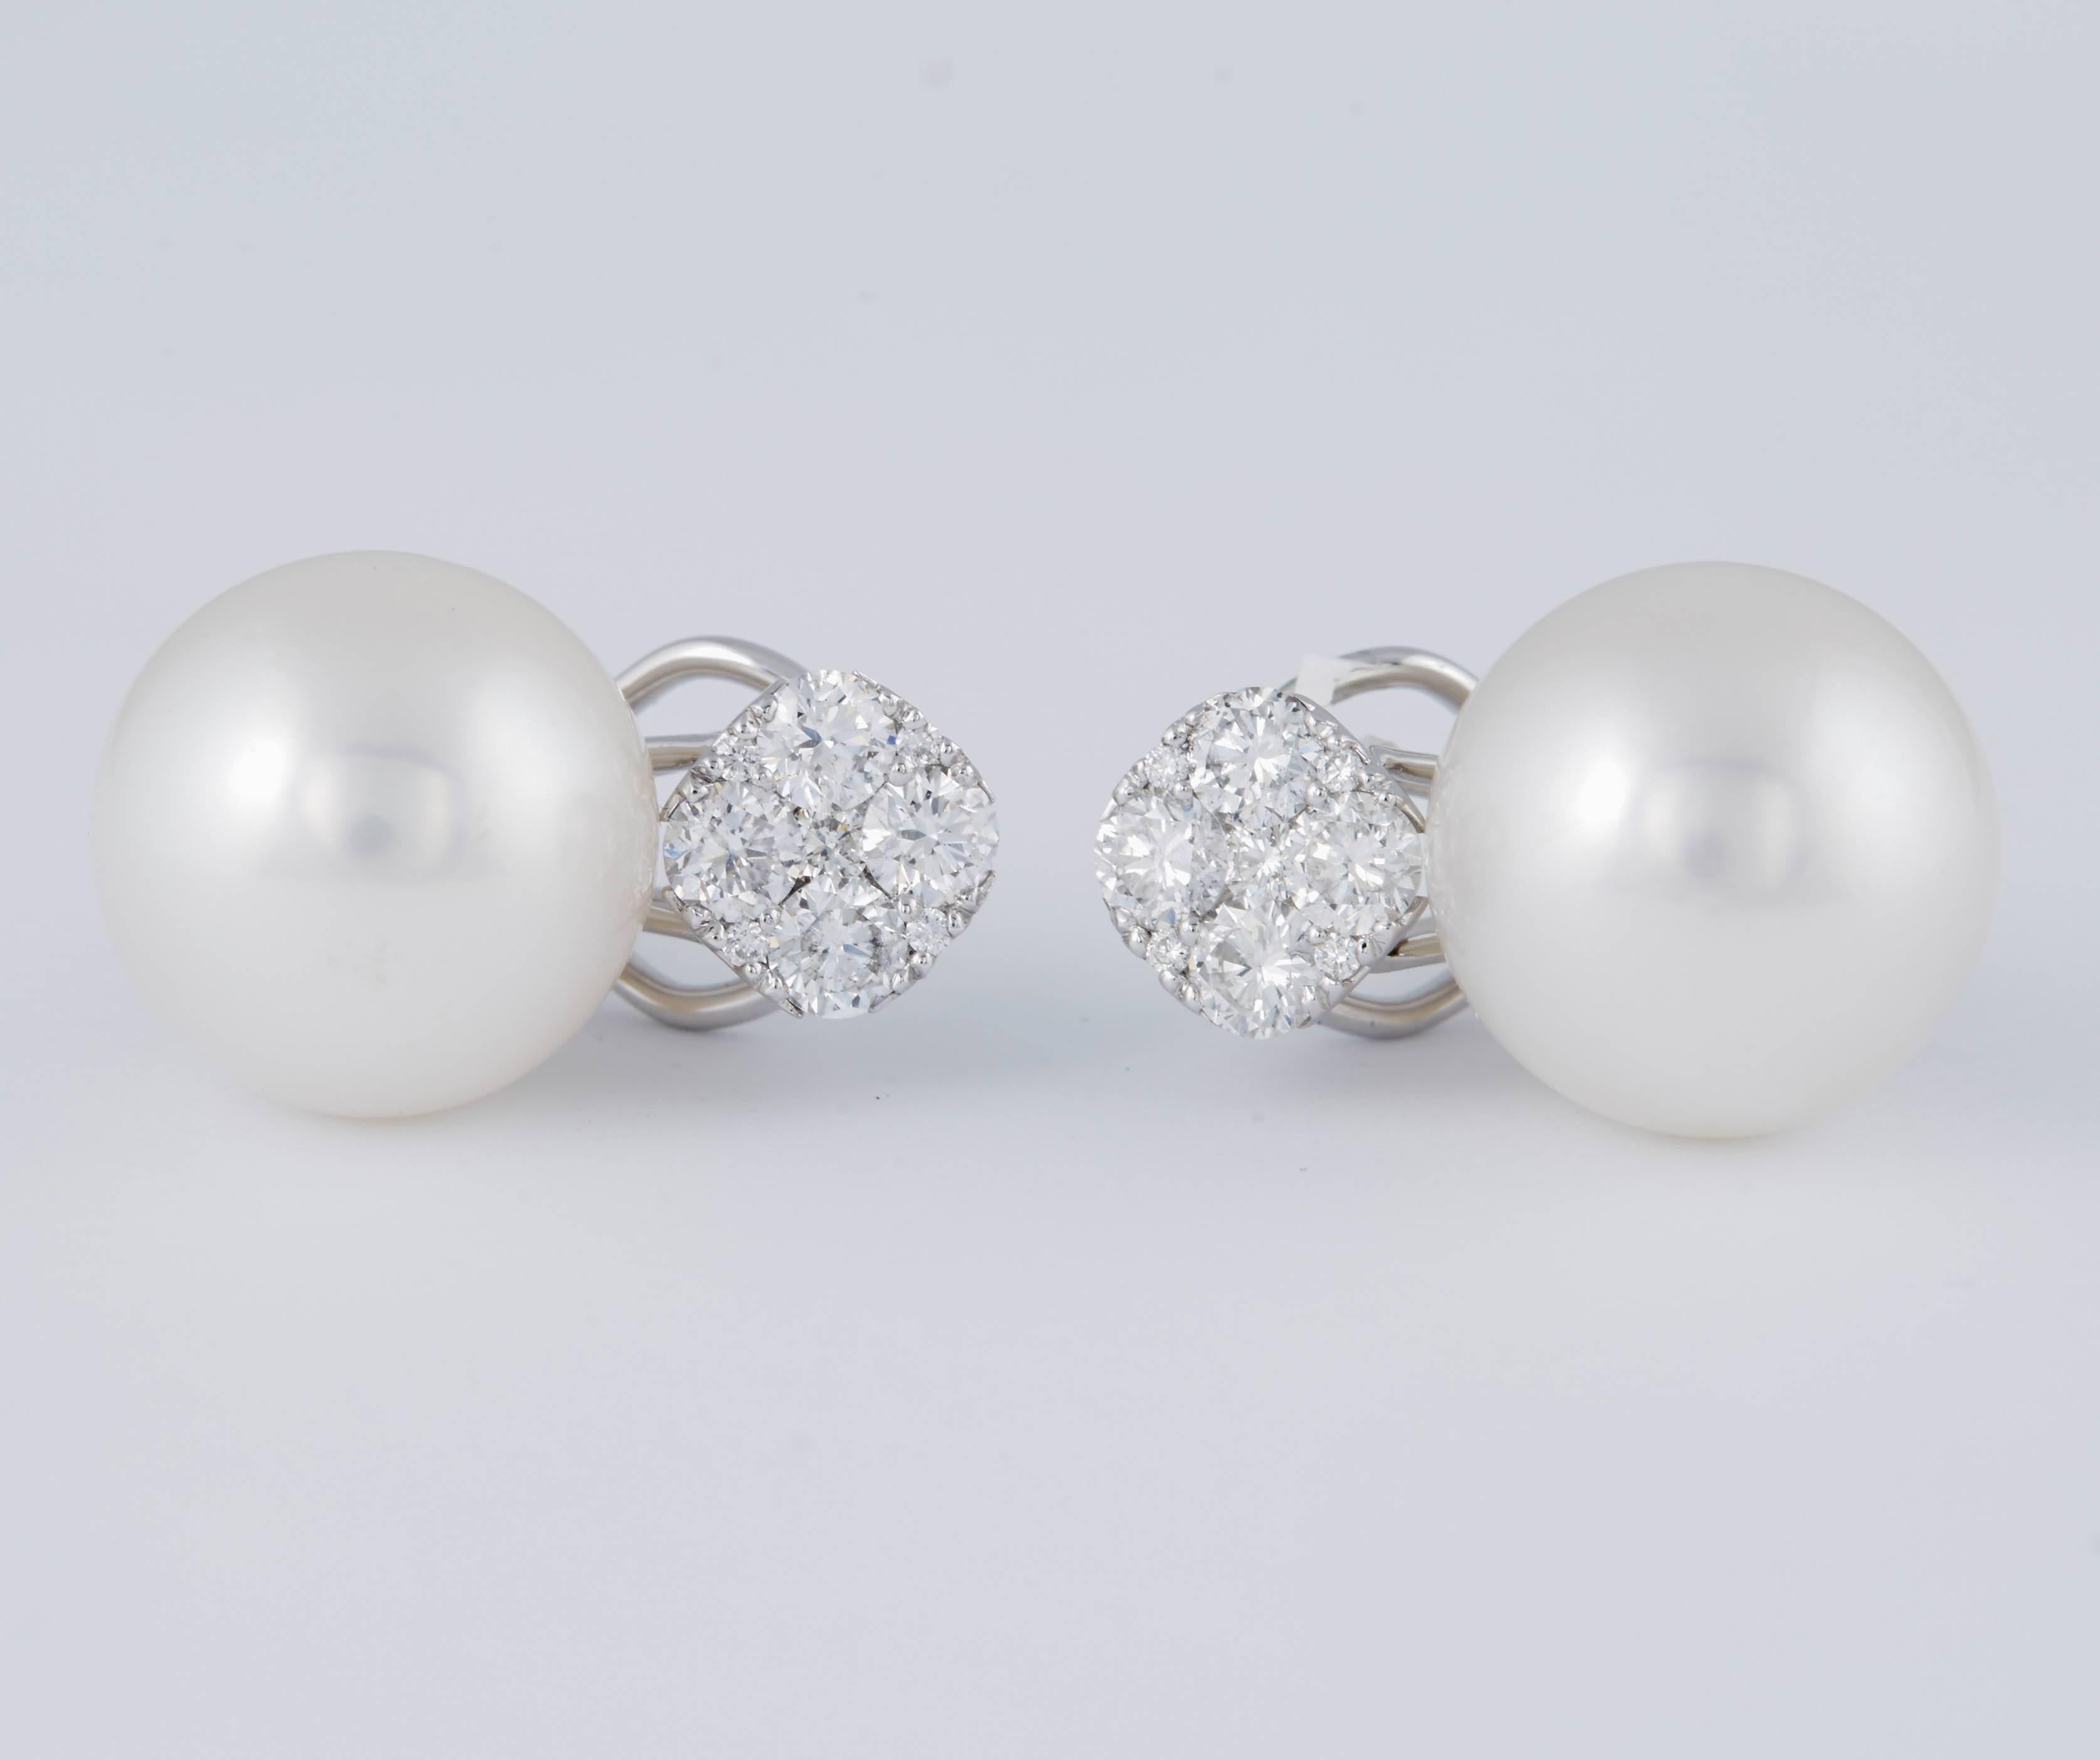 18K White Gold
15 mm South Sea Pearls
Roiund diamonds 1.65 Cts.
The earrings are 1